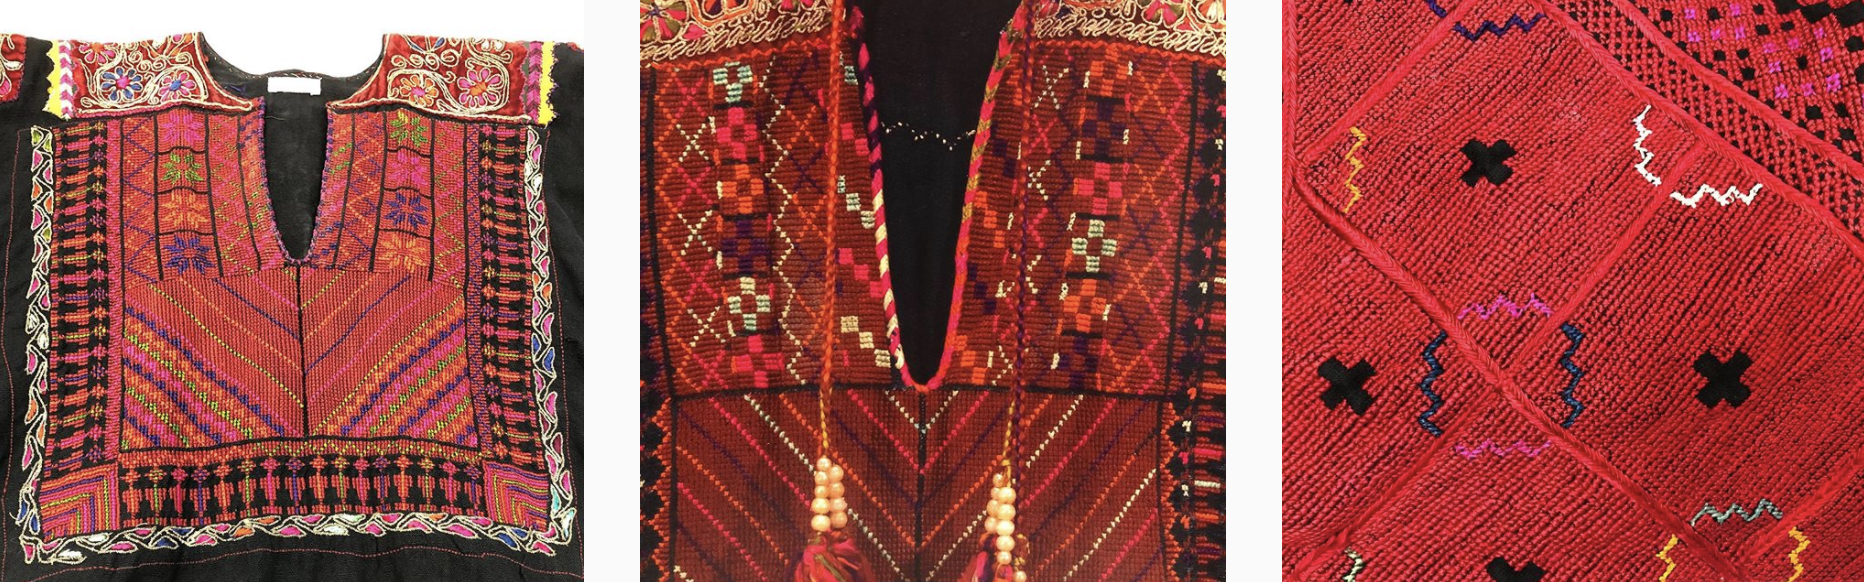 Palestinian embroidery